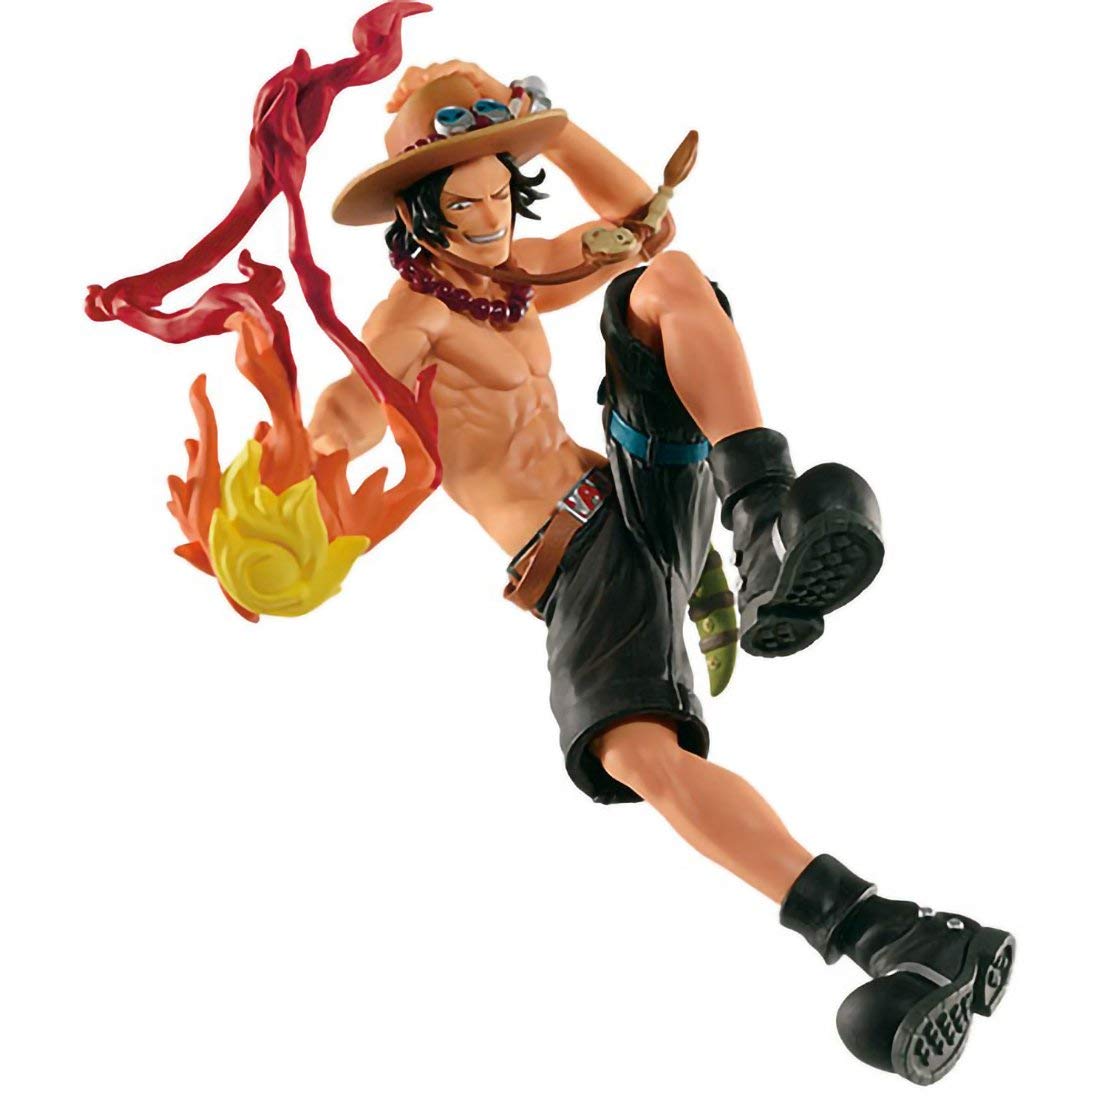 One Piece Scultures Colosseum VI Portgas D. Ace Figure - Super Anime Store FREE SHIPPING FAST SHIPPING USA